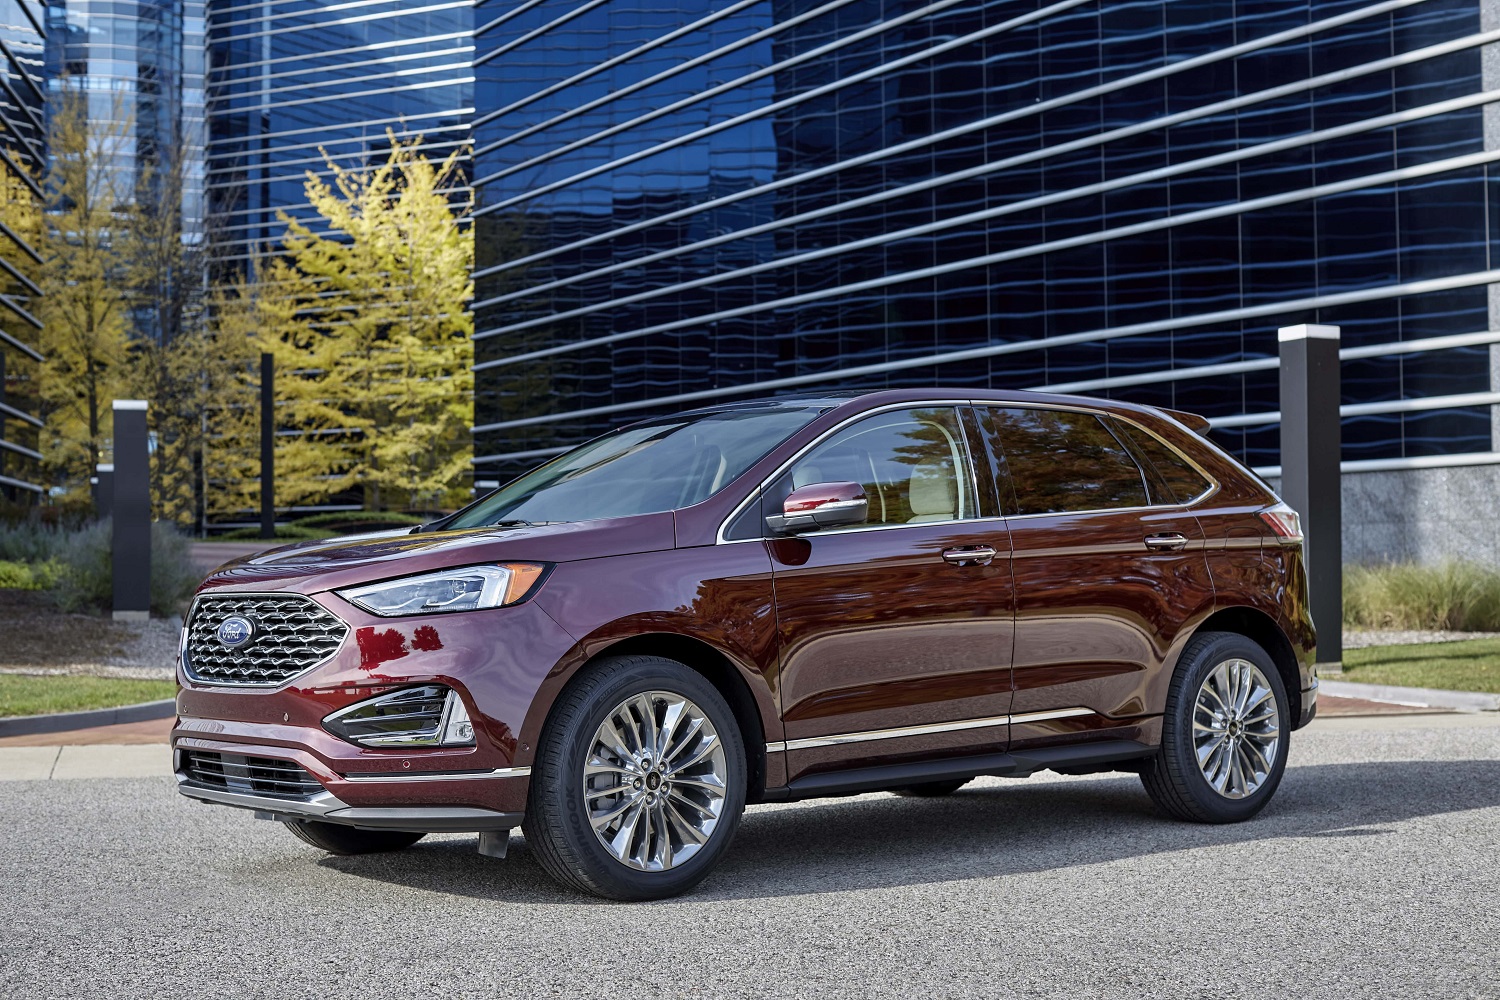 Ford Edge, Lincoln Nautilus Production To End Next Year